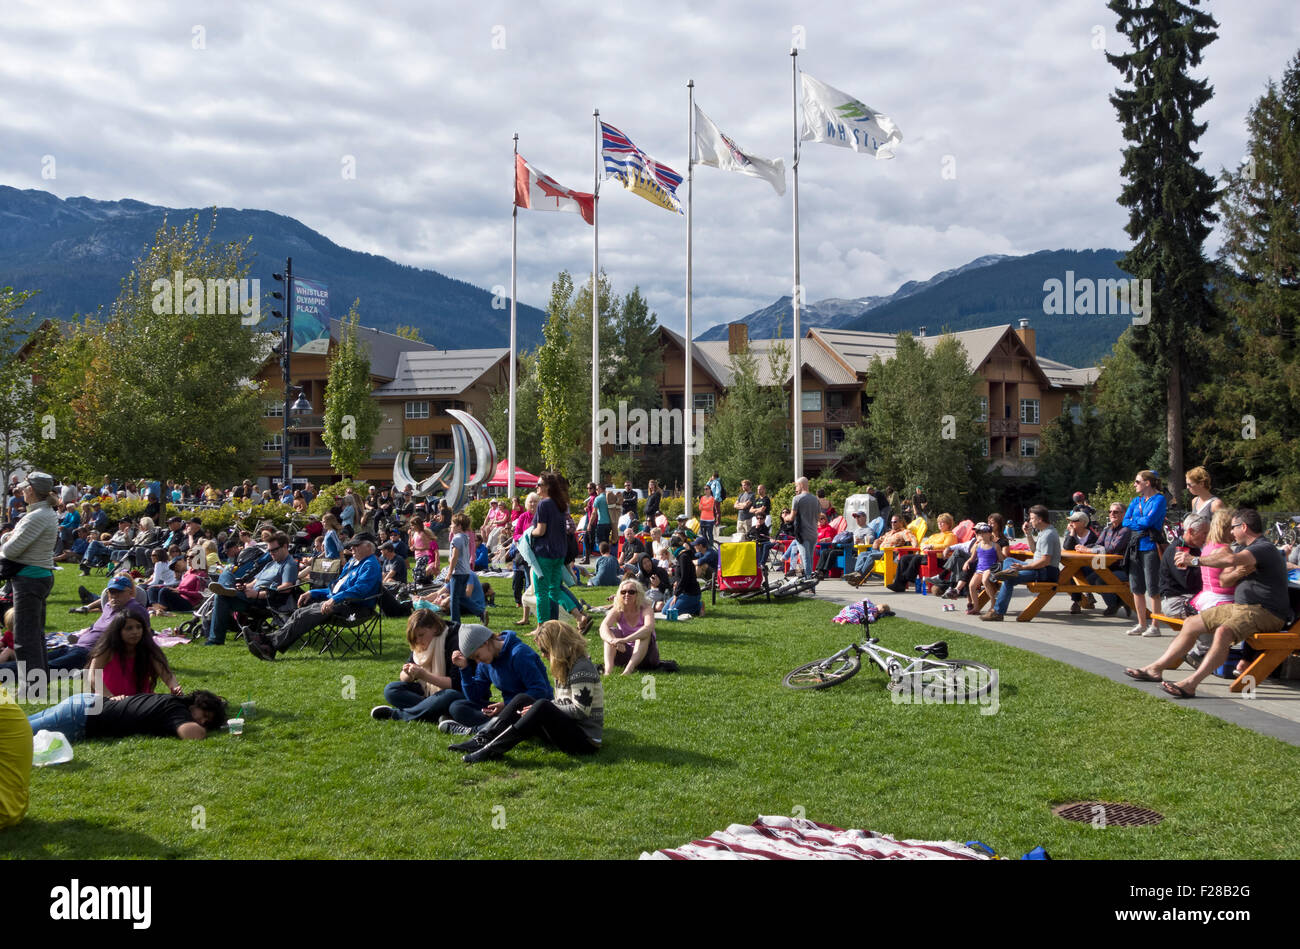 Crowd of people waiting attending an outdoor concert in Whistler Village, British Columbia Canada, on Labour Day weekend 2015. Stock Photo